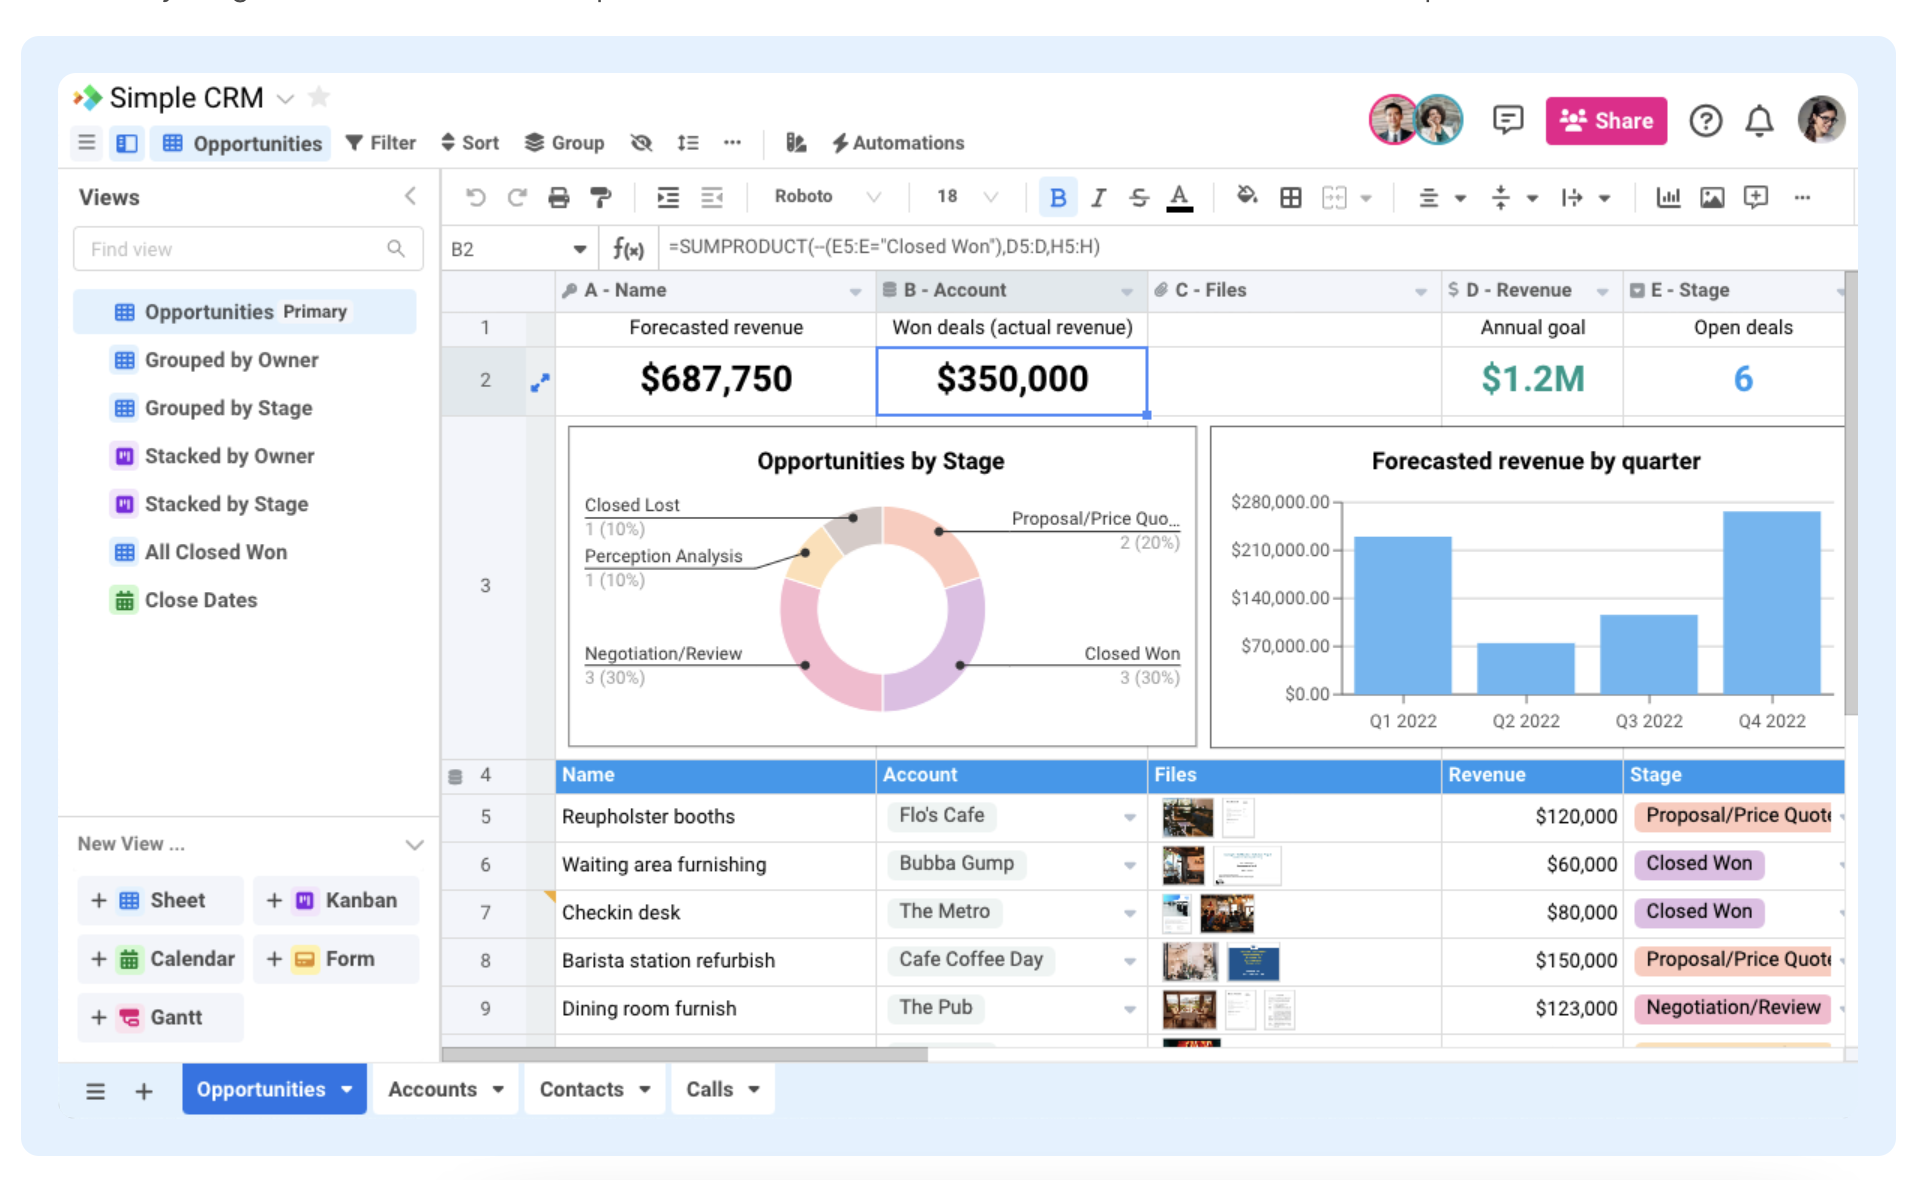 Sheet View -- Get organized fast with a customized view of your data Build everything from classic free-form spreadsheets to structured database tables with relationships.